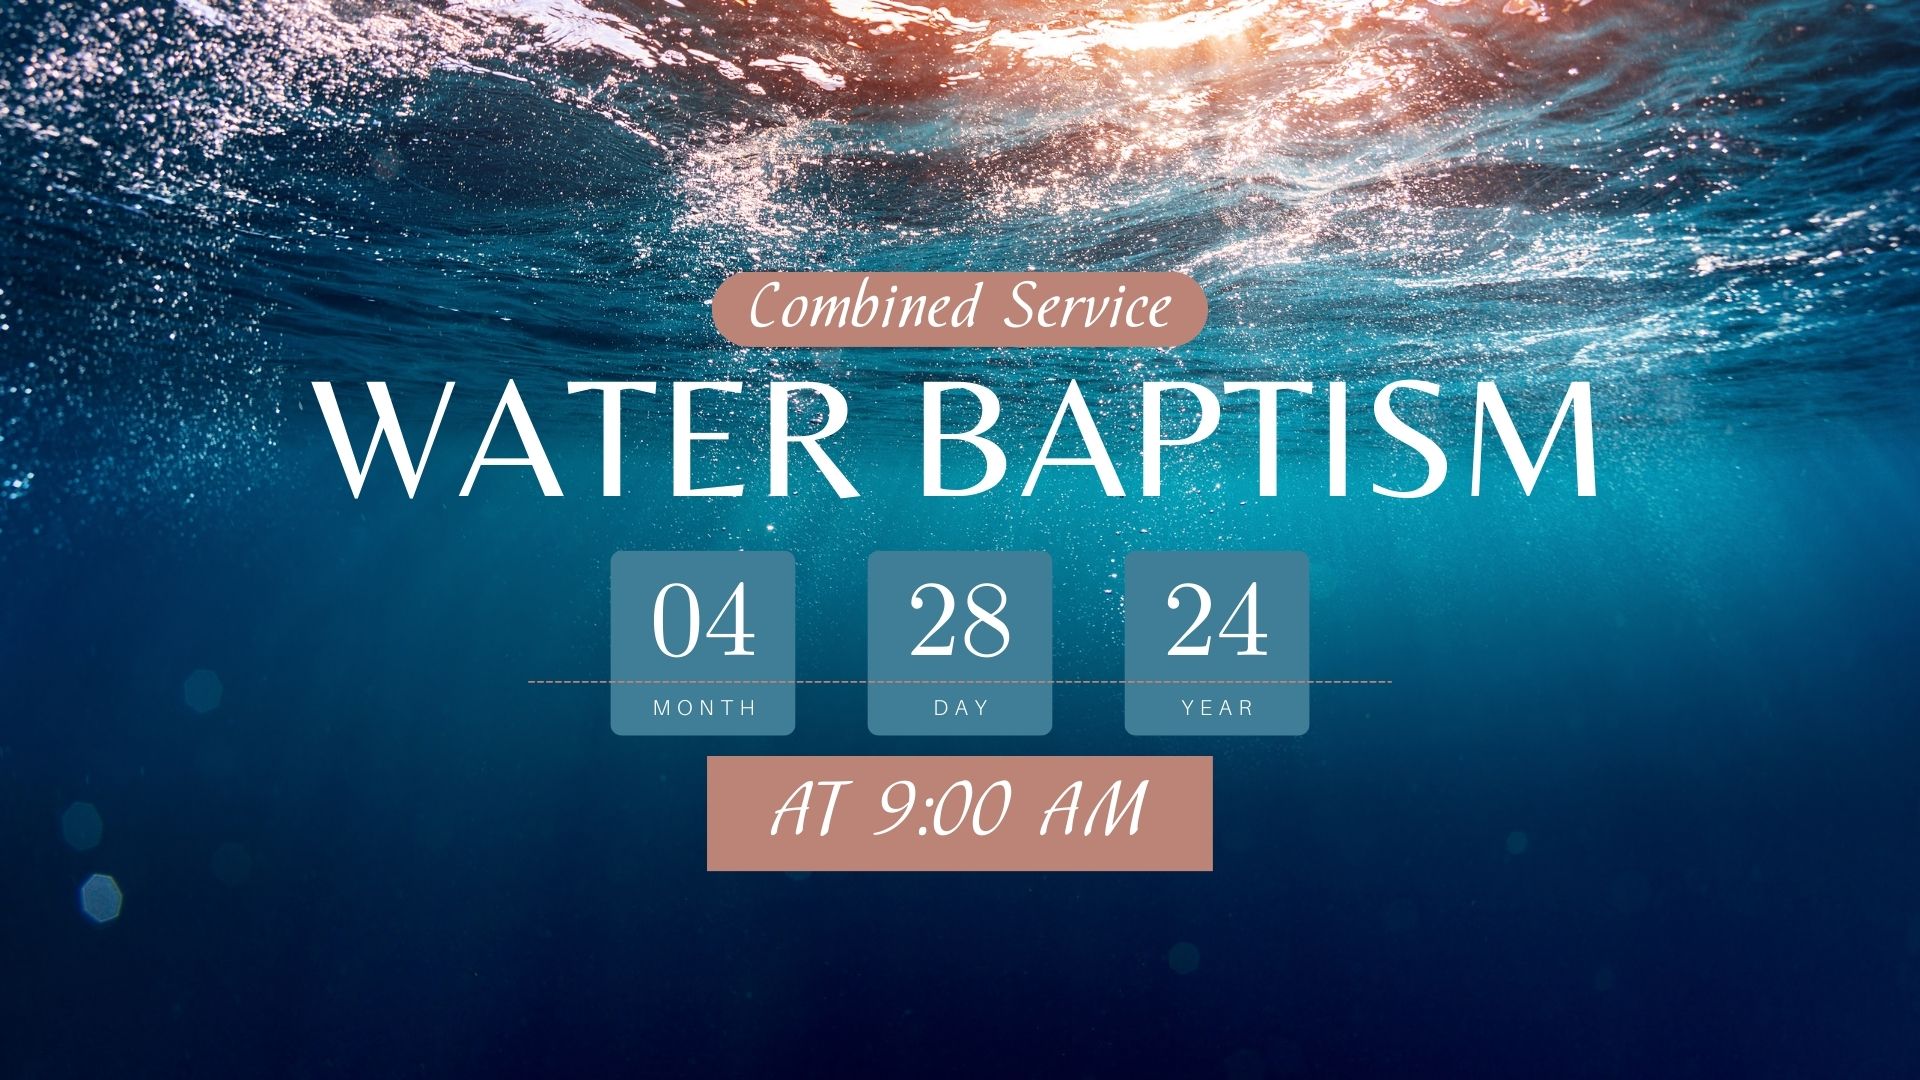 Water Baptism - Combined Service